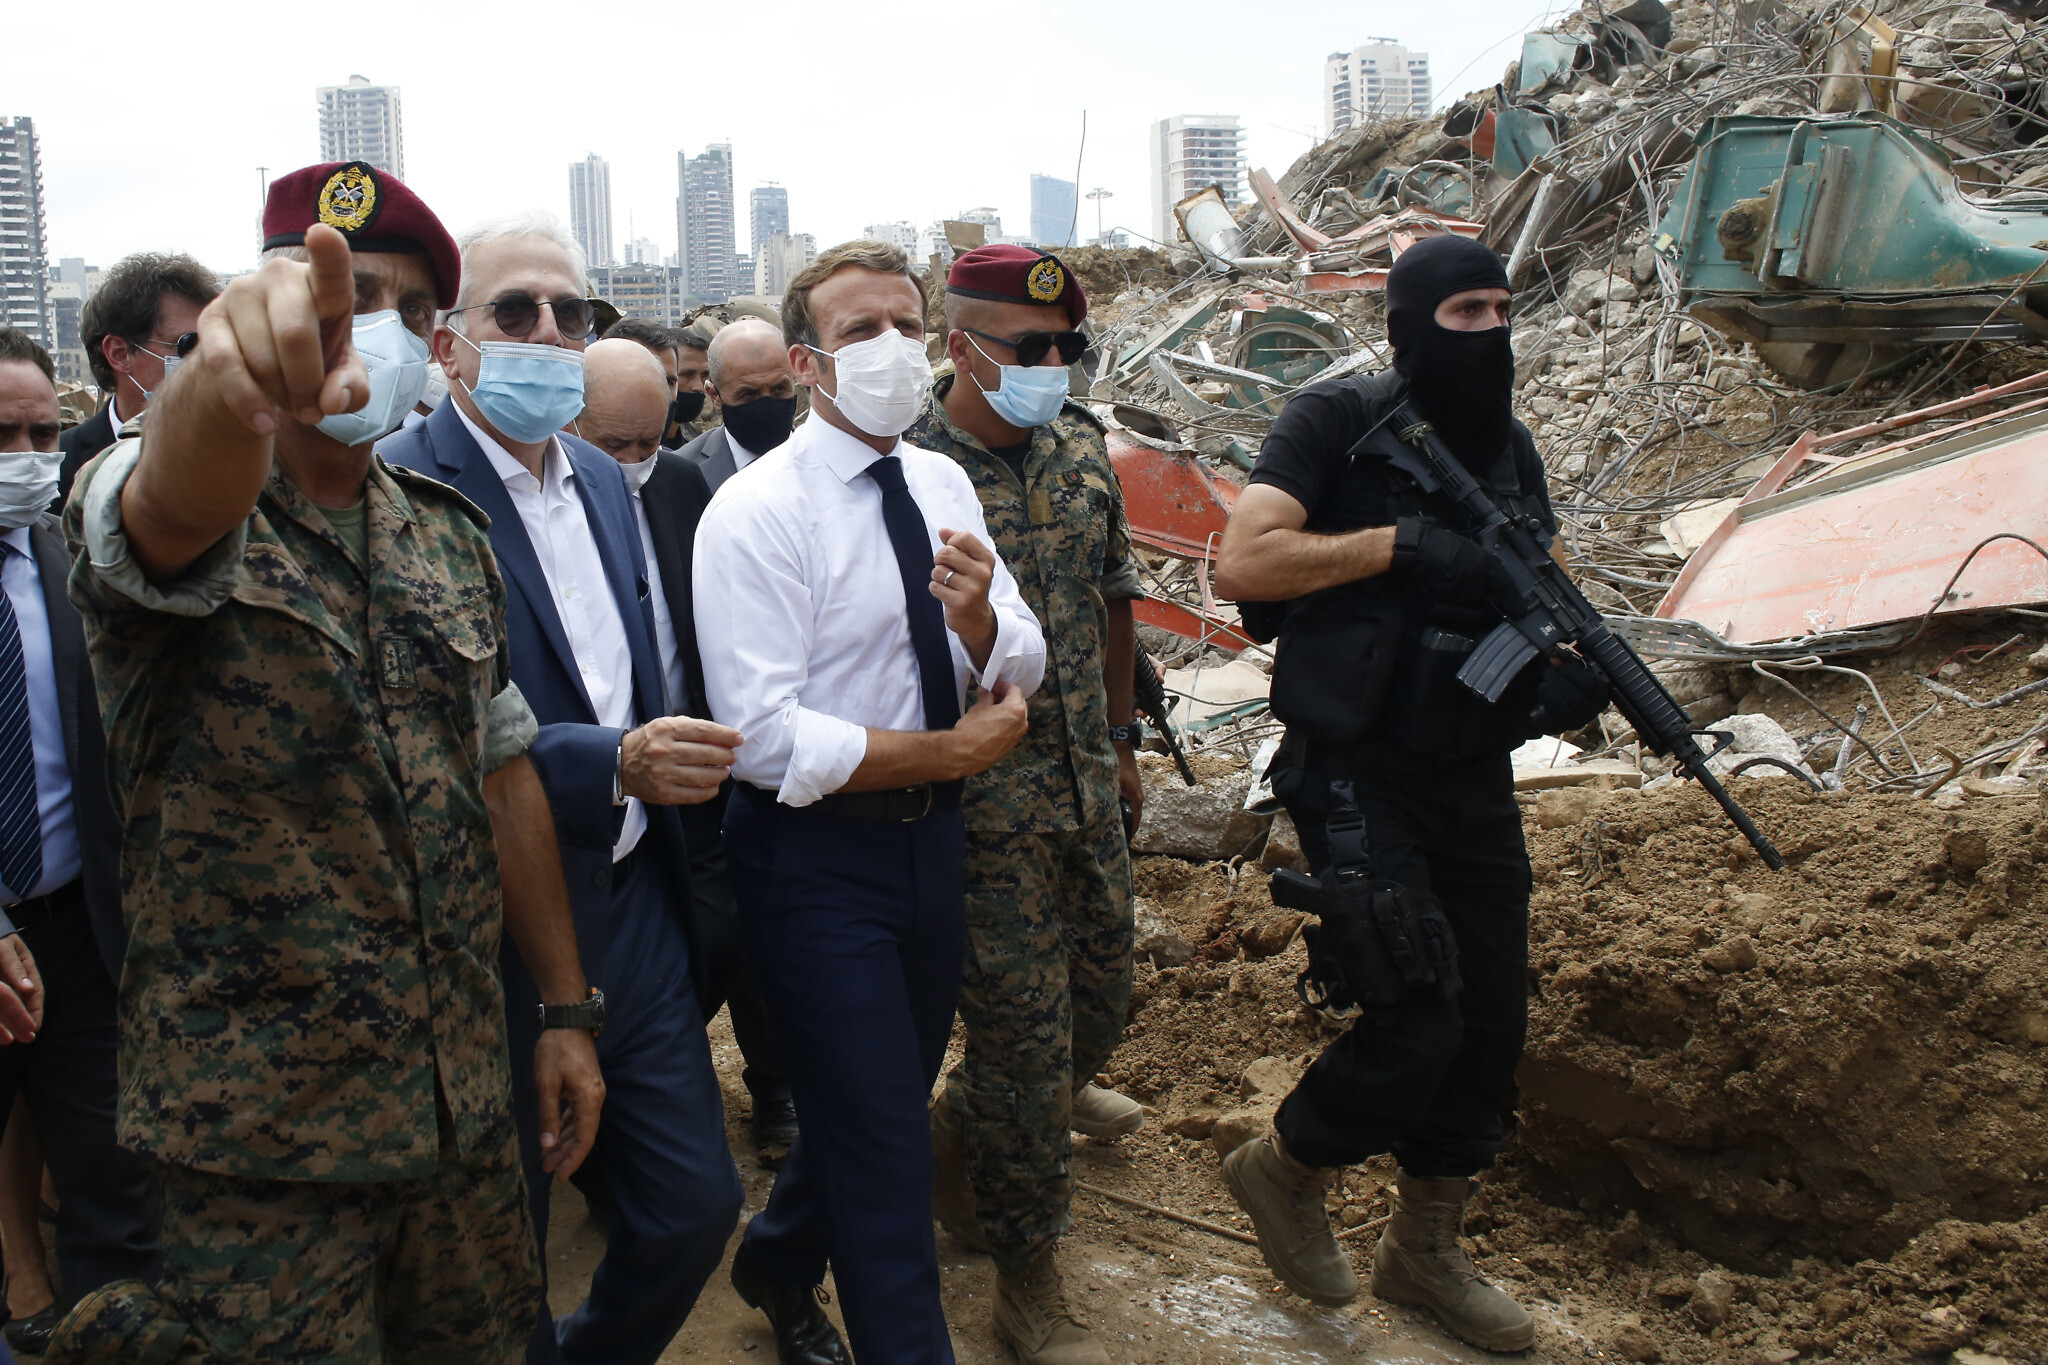 French President Emmanuel Macron, center, visits the devastated site of the explosion at the port of Beirut, Lebanon, August 6, 2020. (AP Photo/Thibault Camus, Pool)